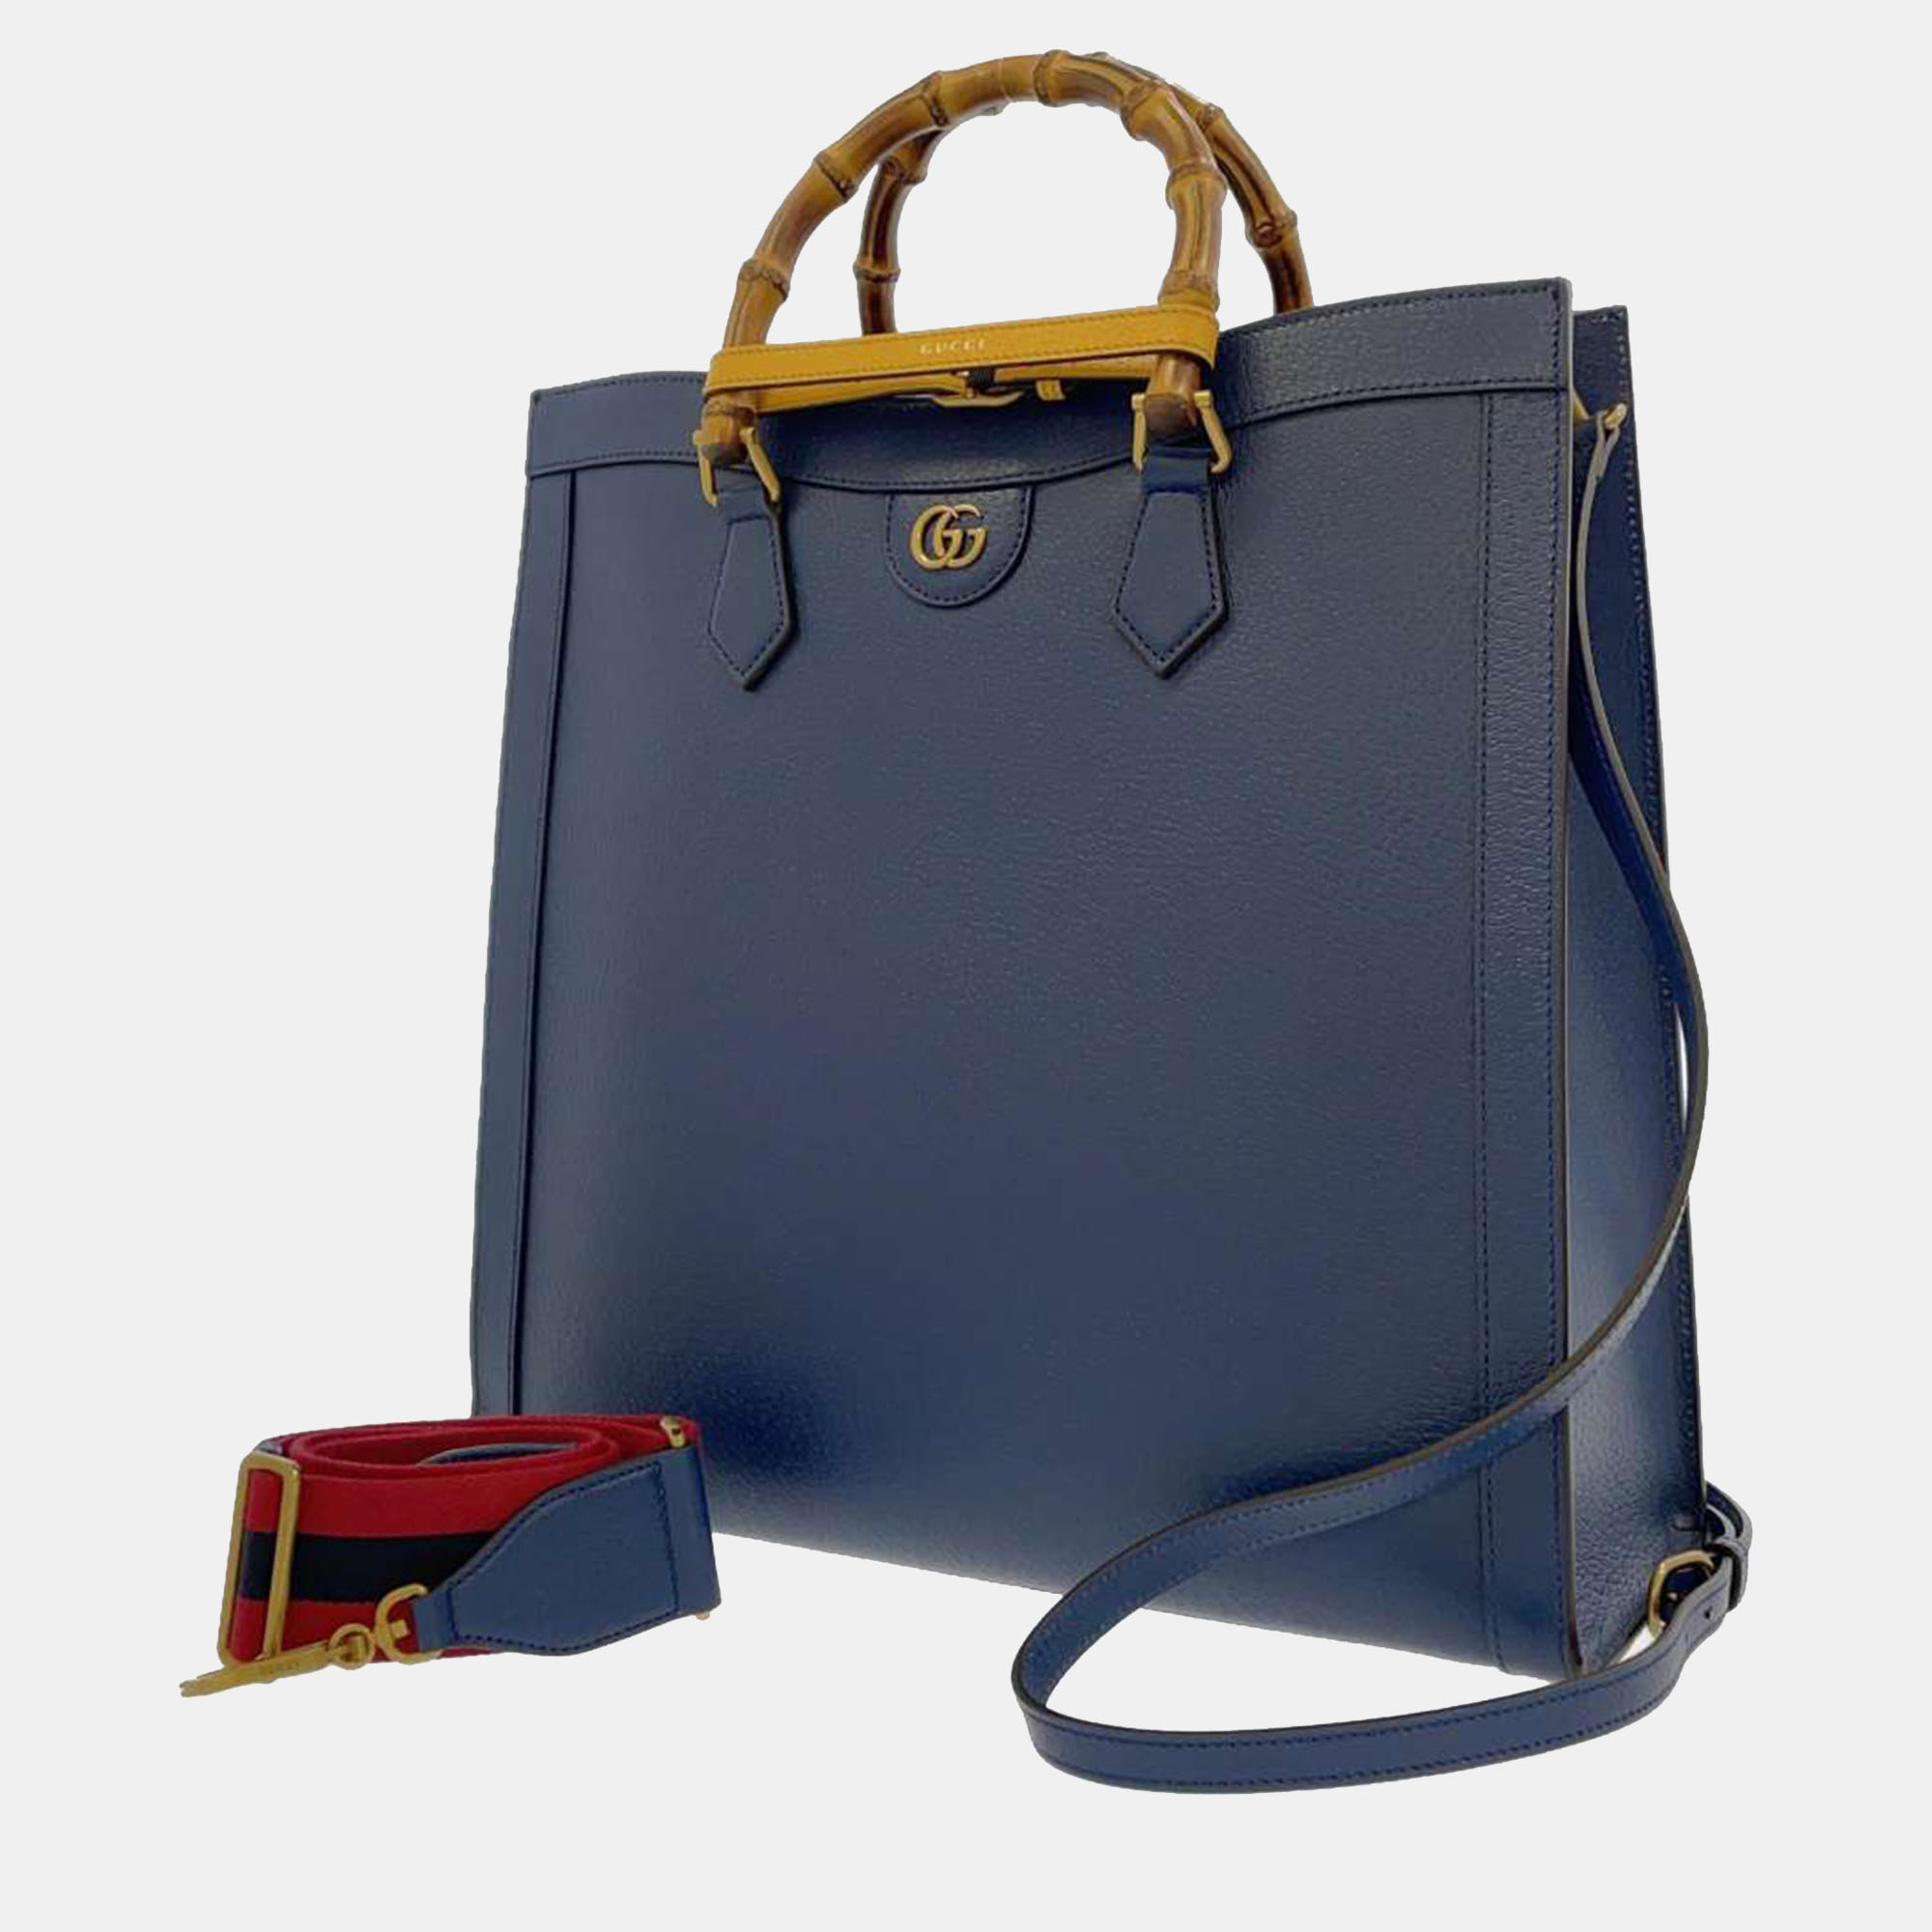 

Gucci Blue Leather Large Bamboo Diana Tote Bag